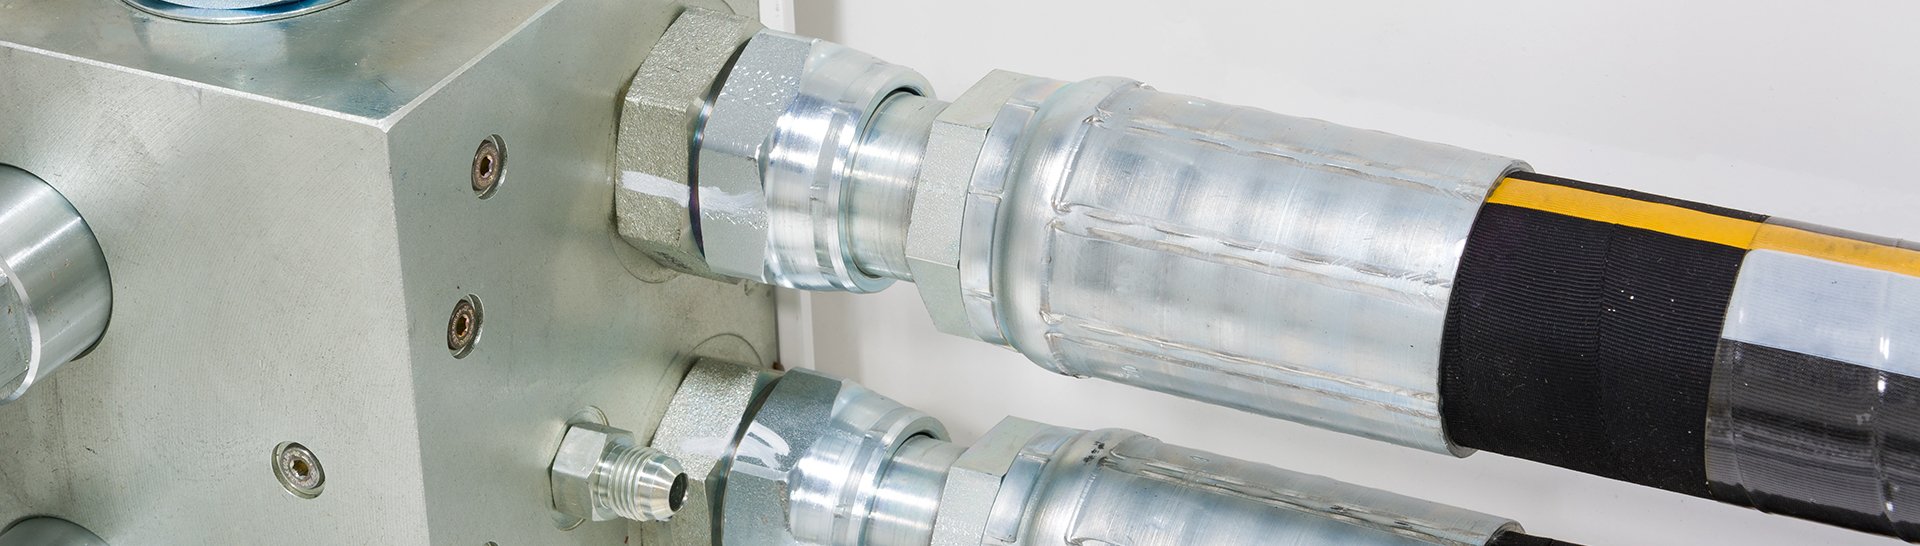 This is an image of hose fittings connected to a machine